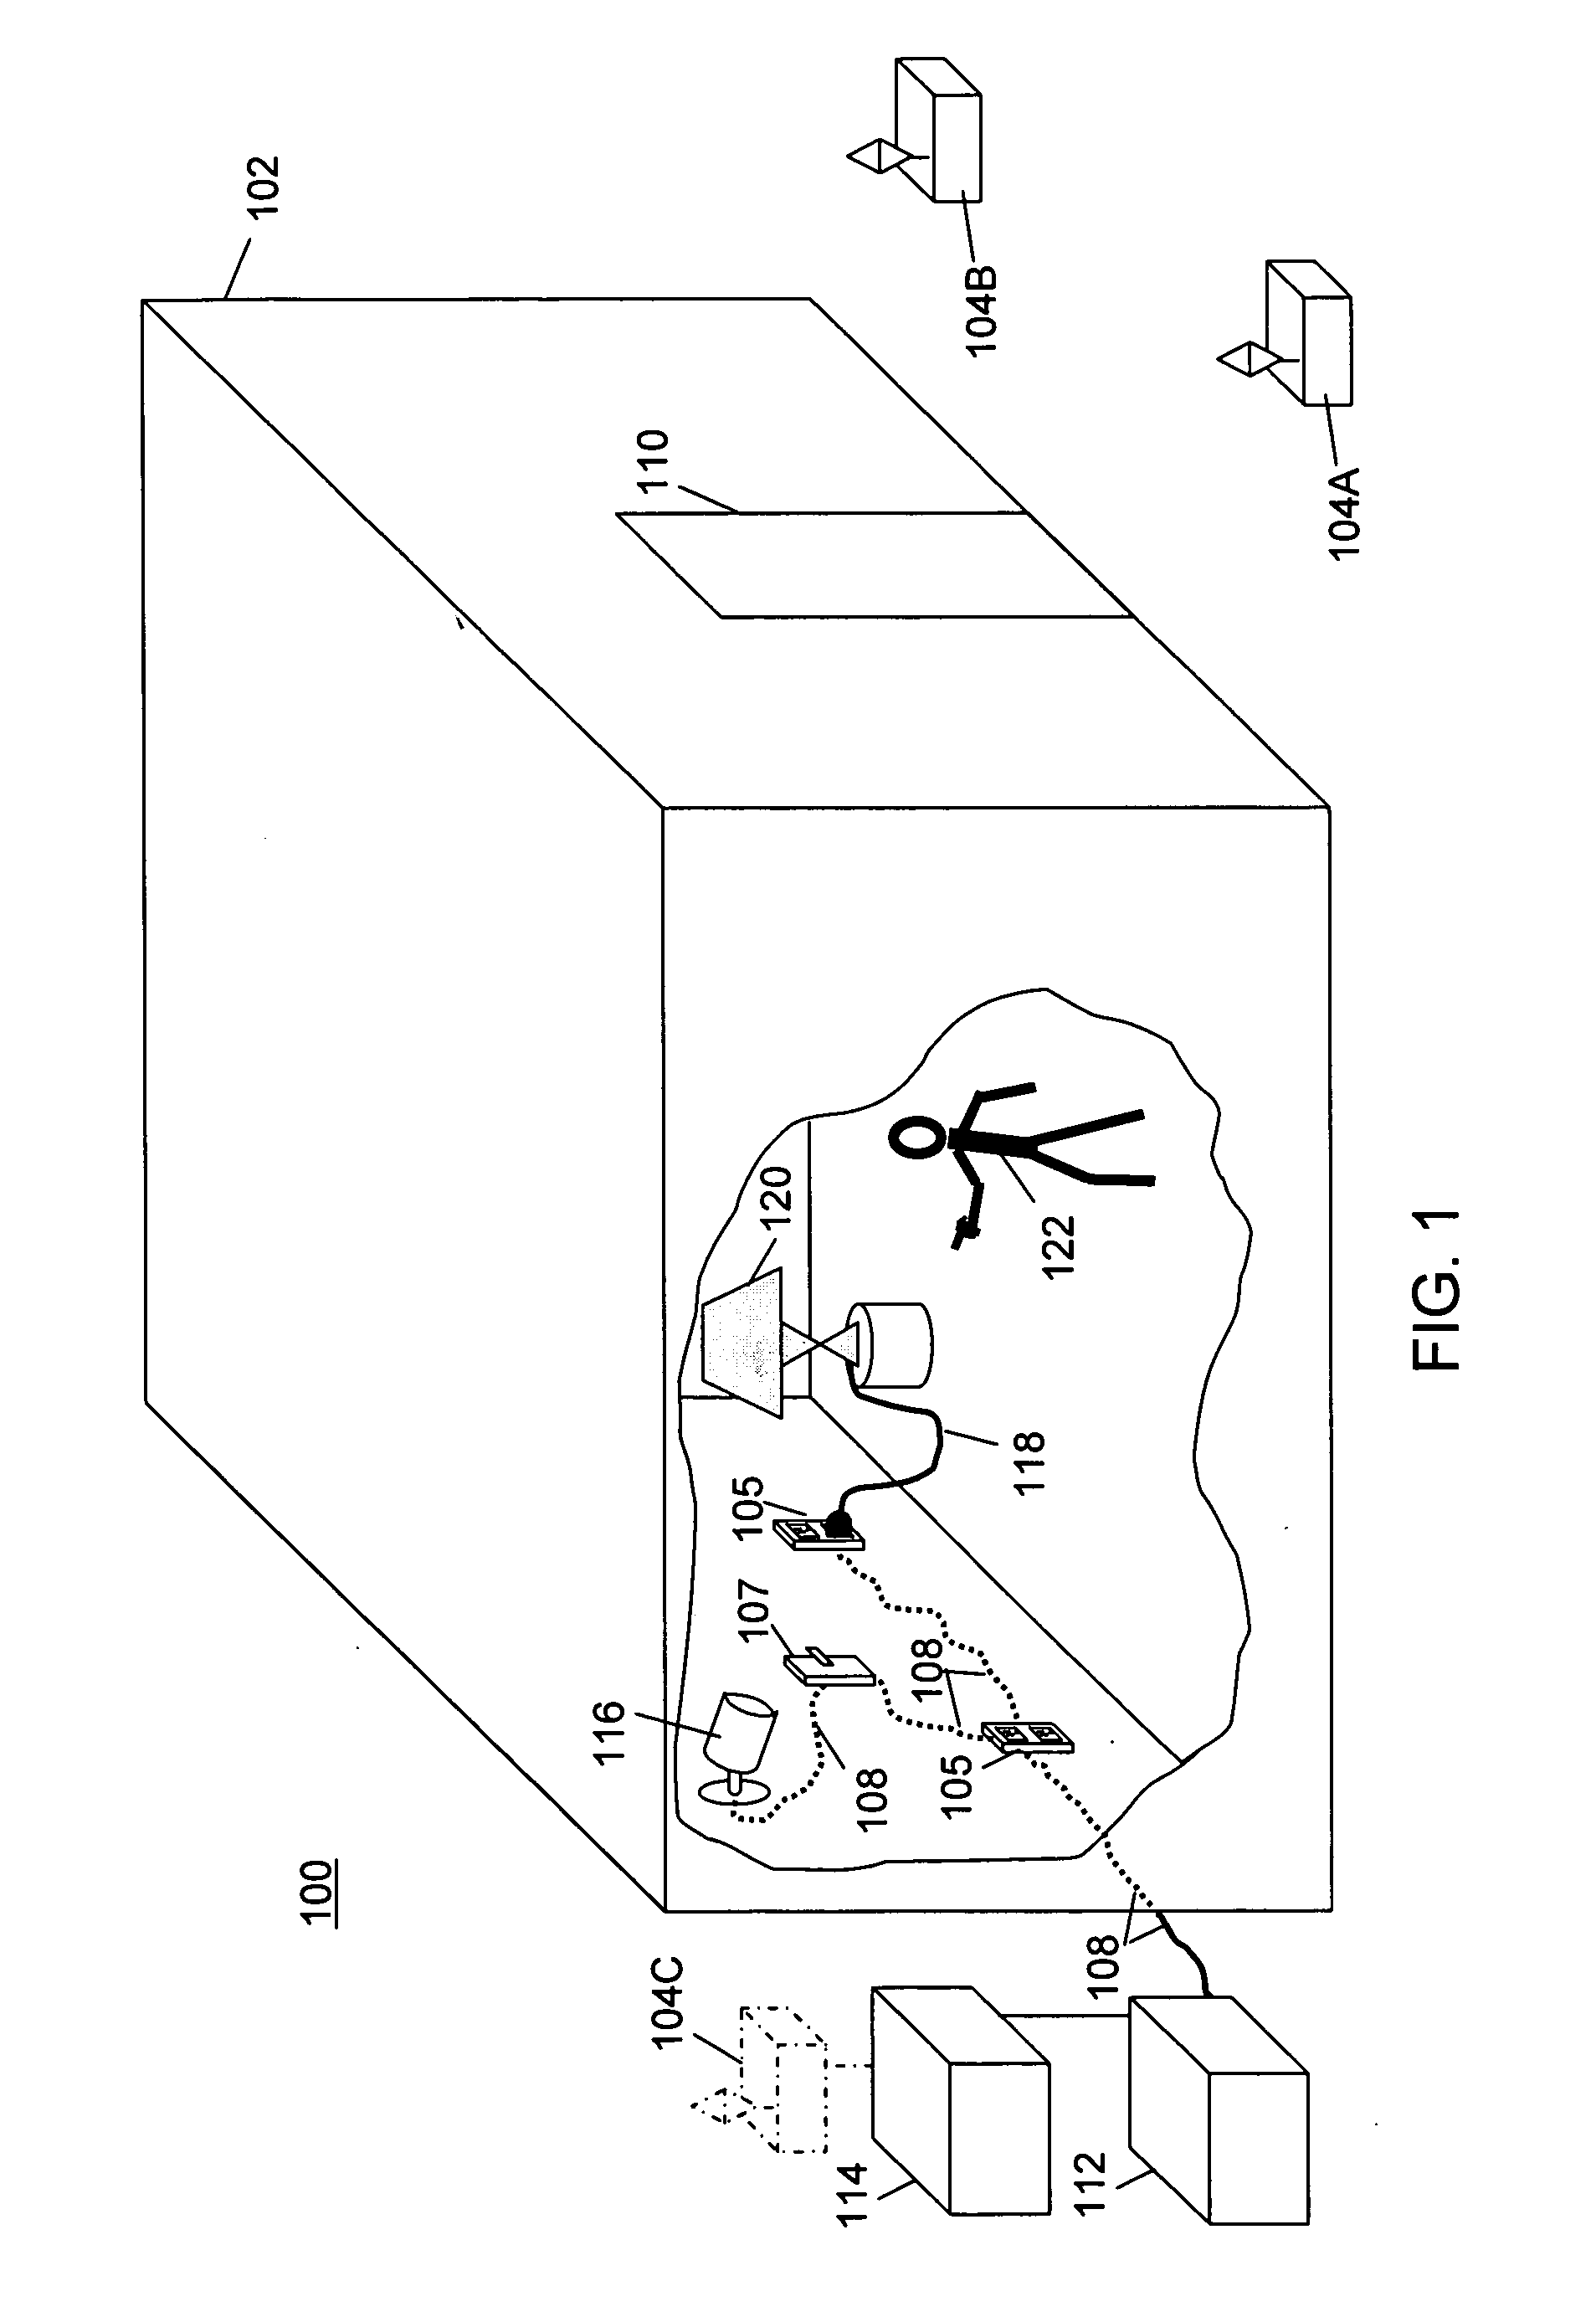 System and method for radiating RF waveforms using discontinues associated with a utility transmission line